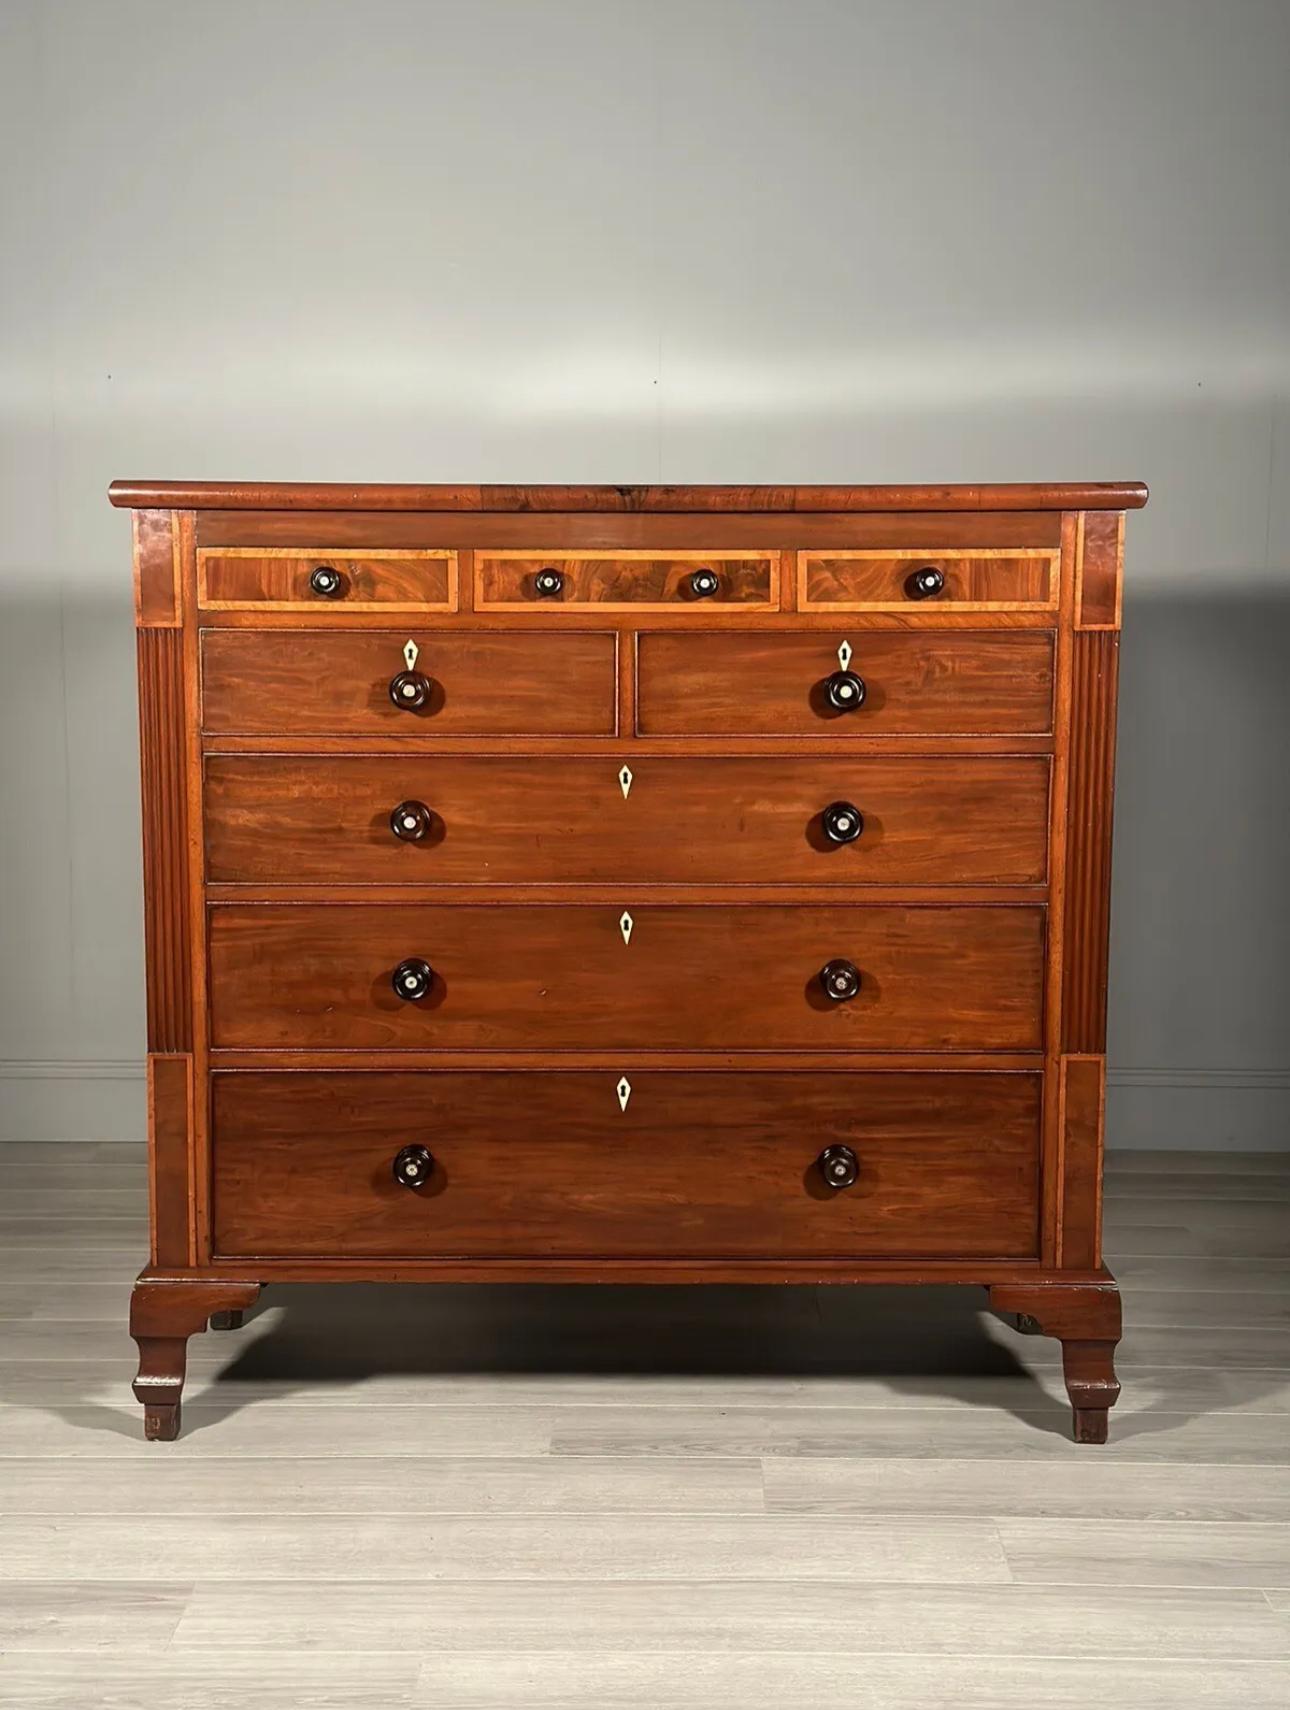 Huge antique chest of drawers dating to the early Victorian period. The chest is made from solid mahogany, satin wood banding, turned ebony handles and is in fantastic original condition. The chest consists of 3 small drawers over 2 medium drawers